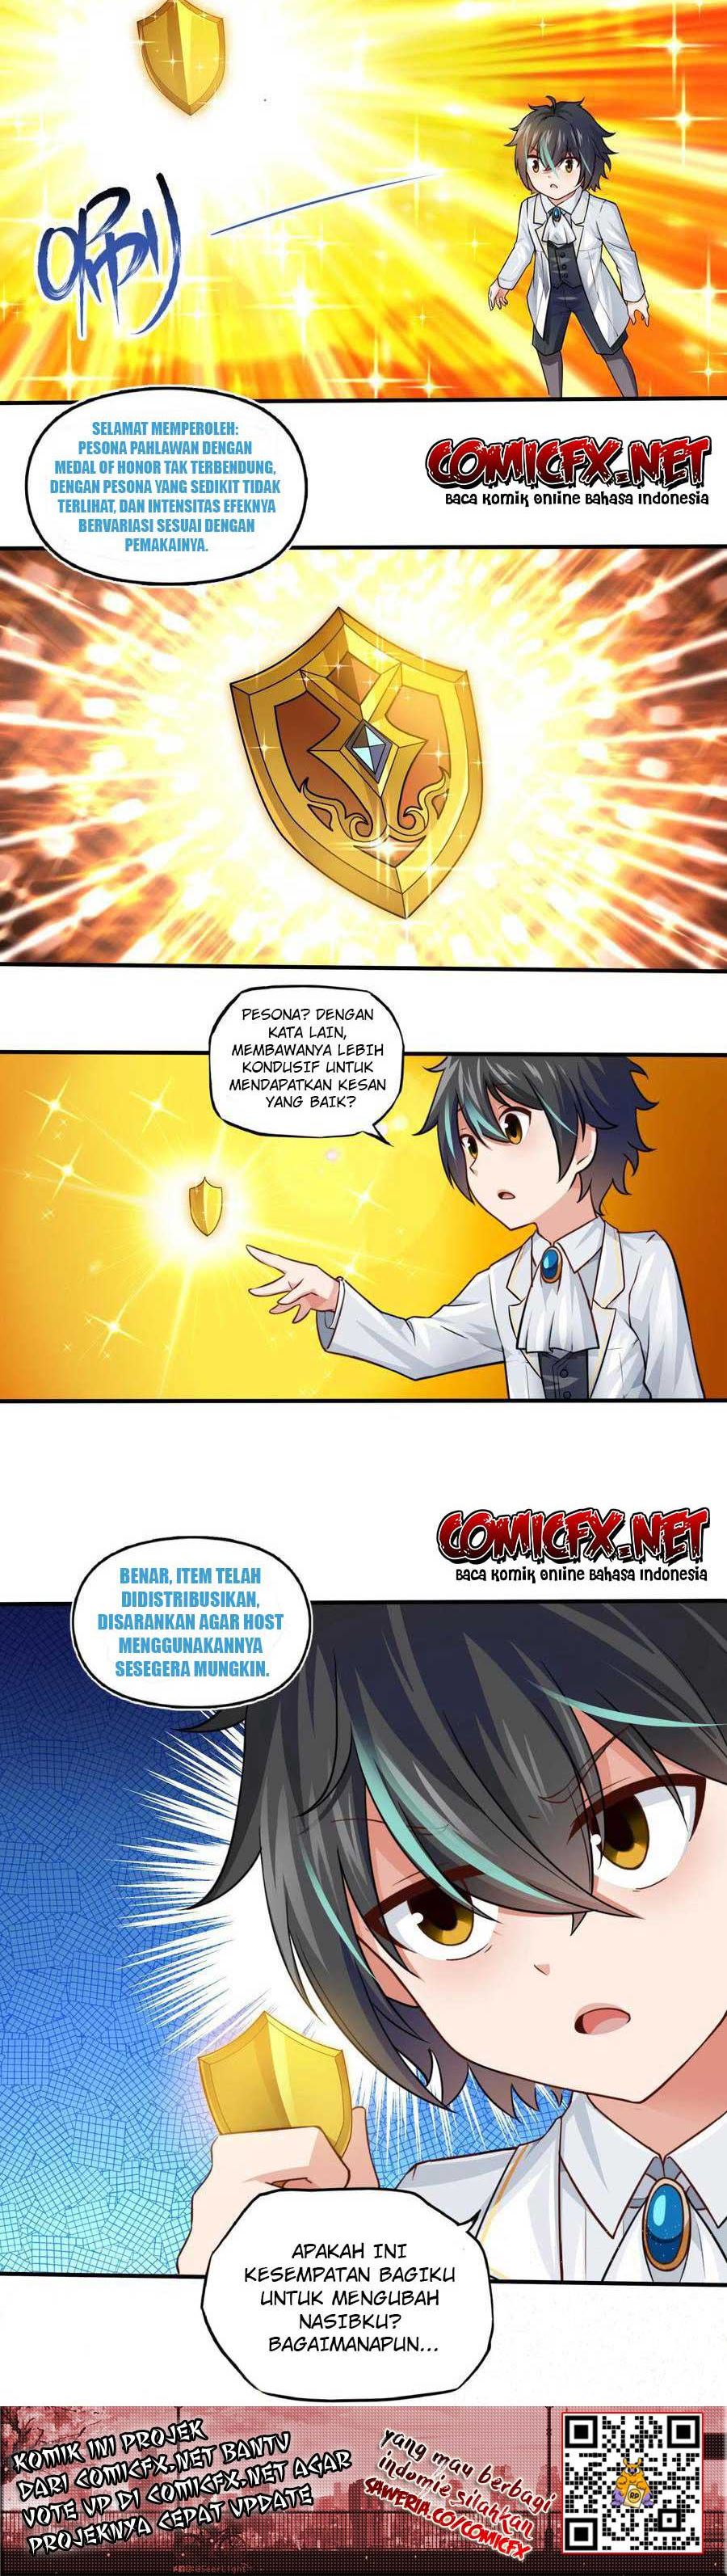 Dilarang COPAS - situs resmi www.mangacanblog.com - Komik little tyrant doesnt want to meet with a bad end 001 - chapter 1 2 Indonesia little tyrant doesnt want to meet with a bad end 001 - chapter 1 Terbaru 15|Baca Manga Komik Indonesia|Mangacan